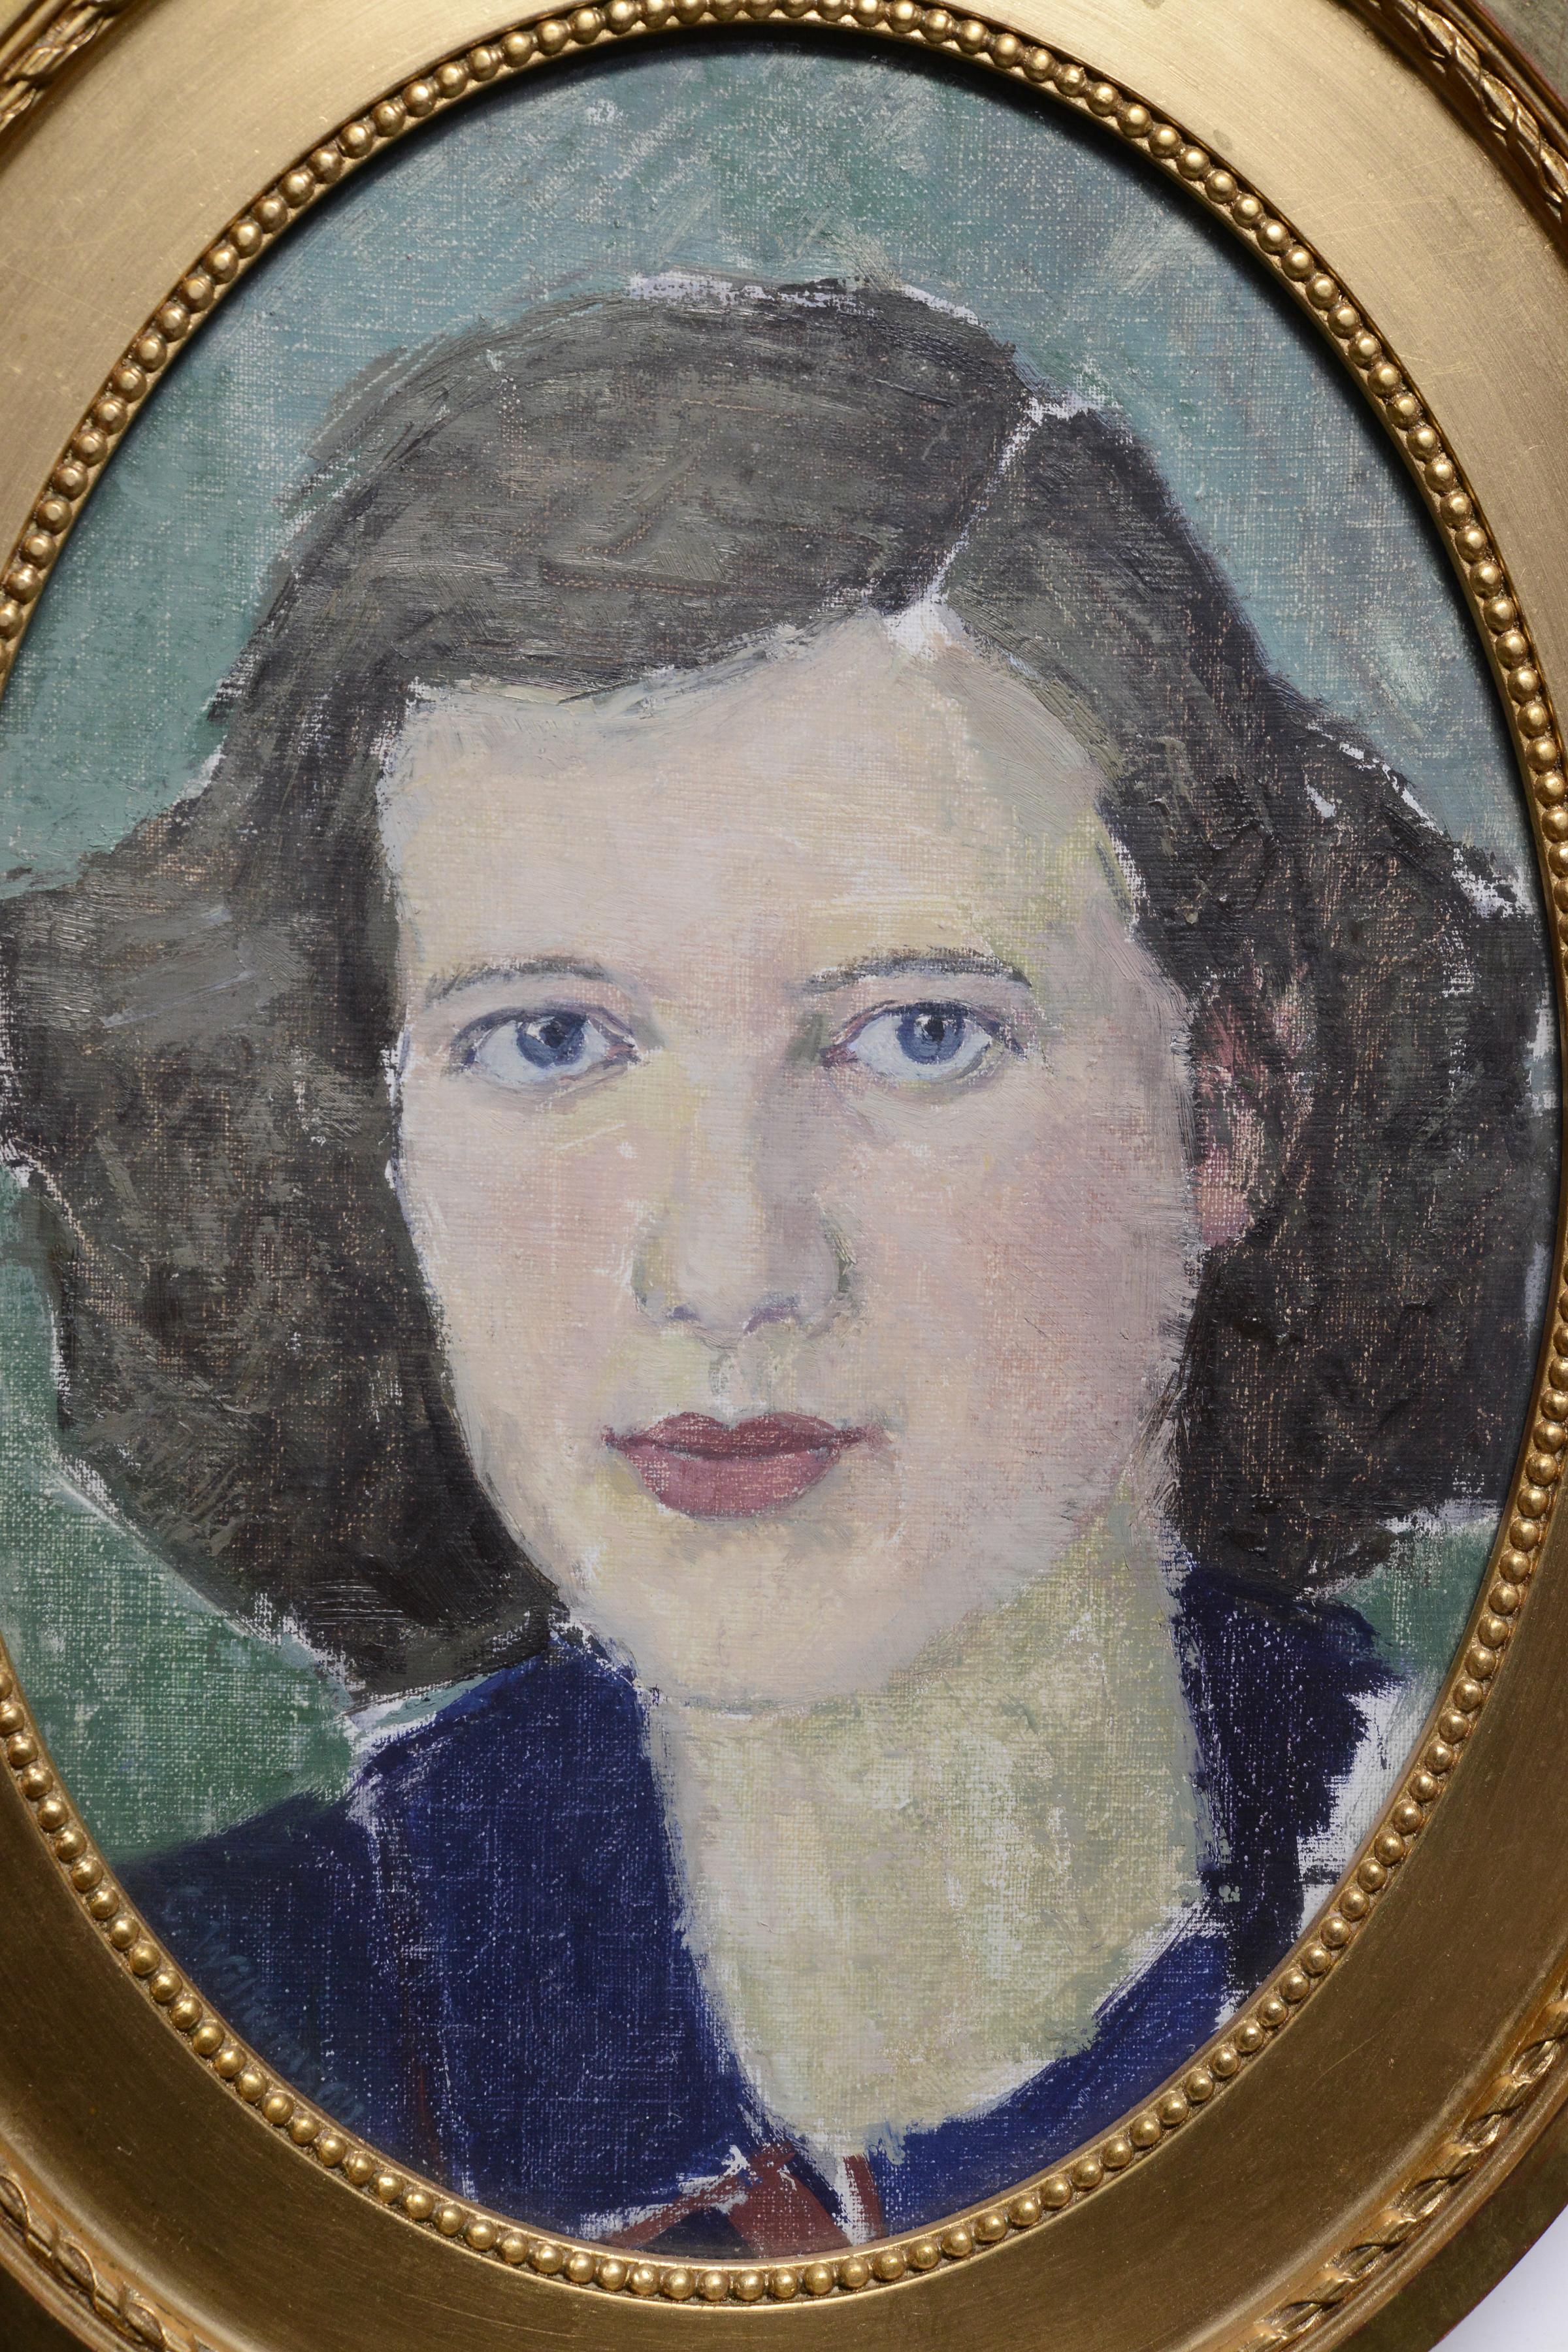 Blue-Eyed Young Woman Portrait Framed Oval by Swedish Master early 20th century - Painting by Unknown